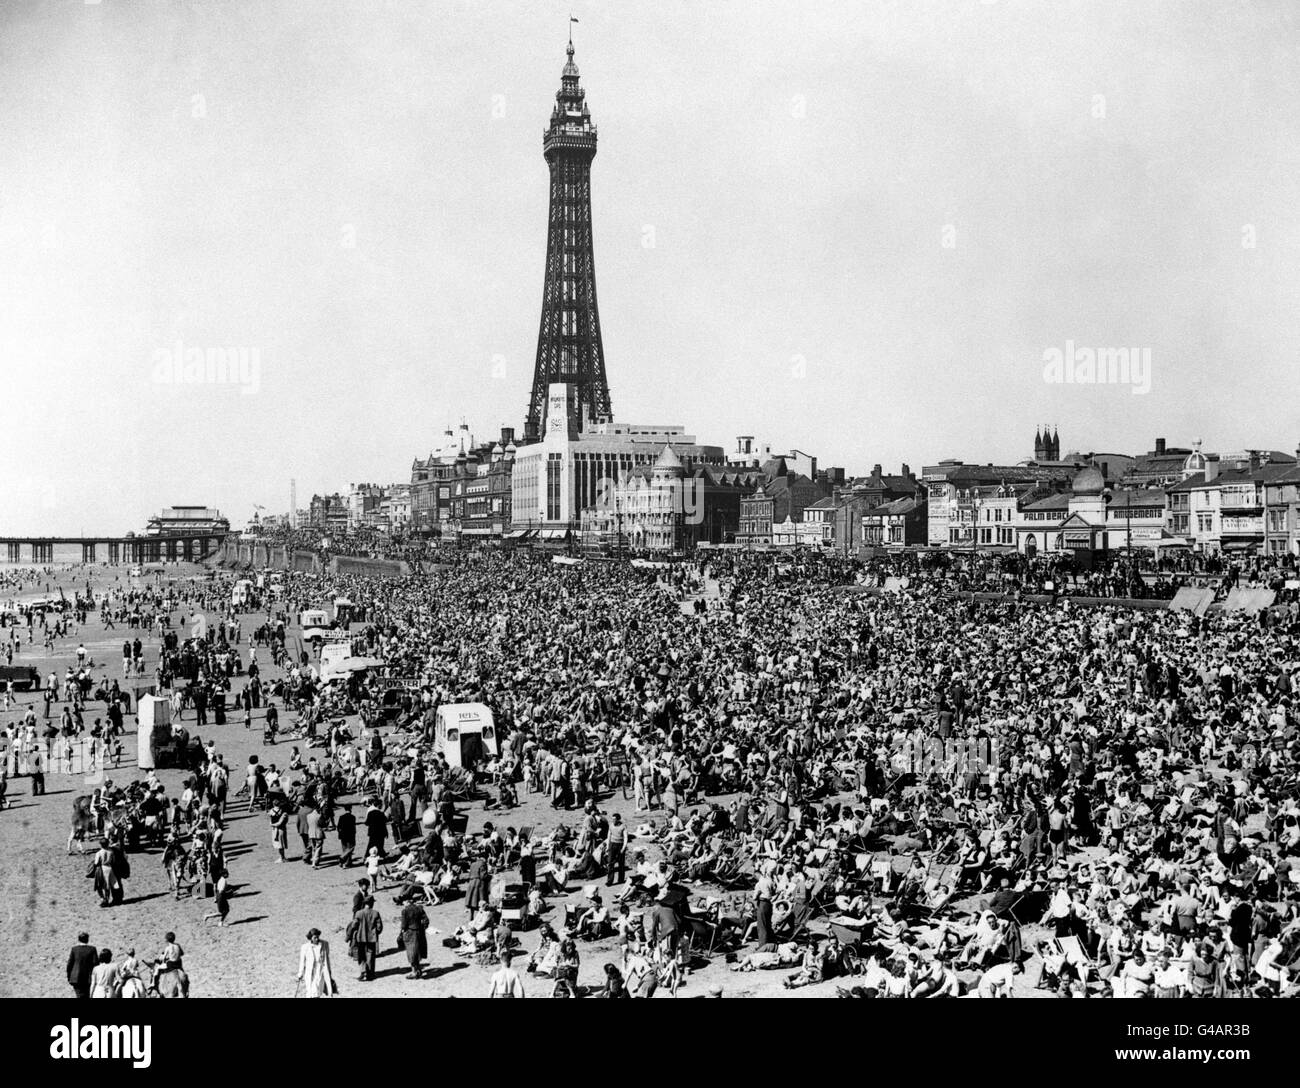 Leisure and Tourism - The Seaside - Blackpool. Blackpool Tower and beach in 1948. Stock Photo